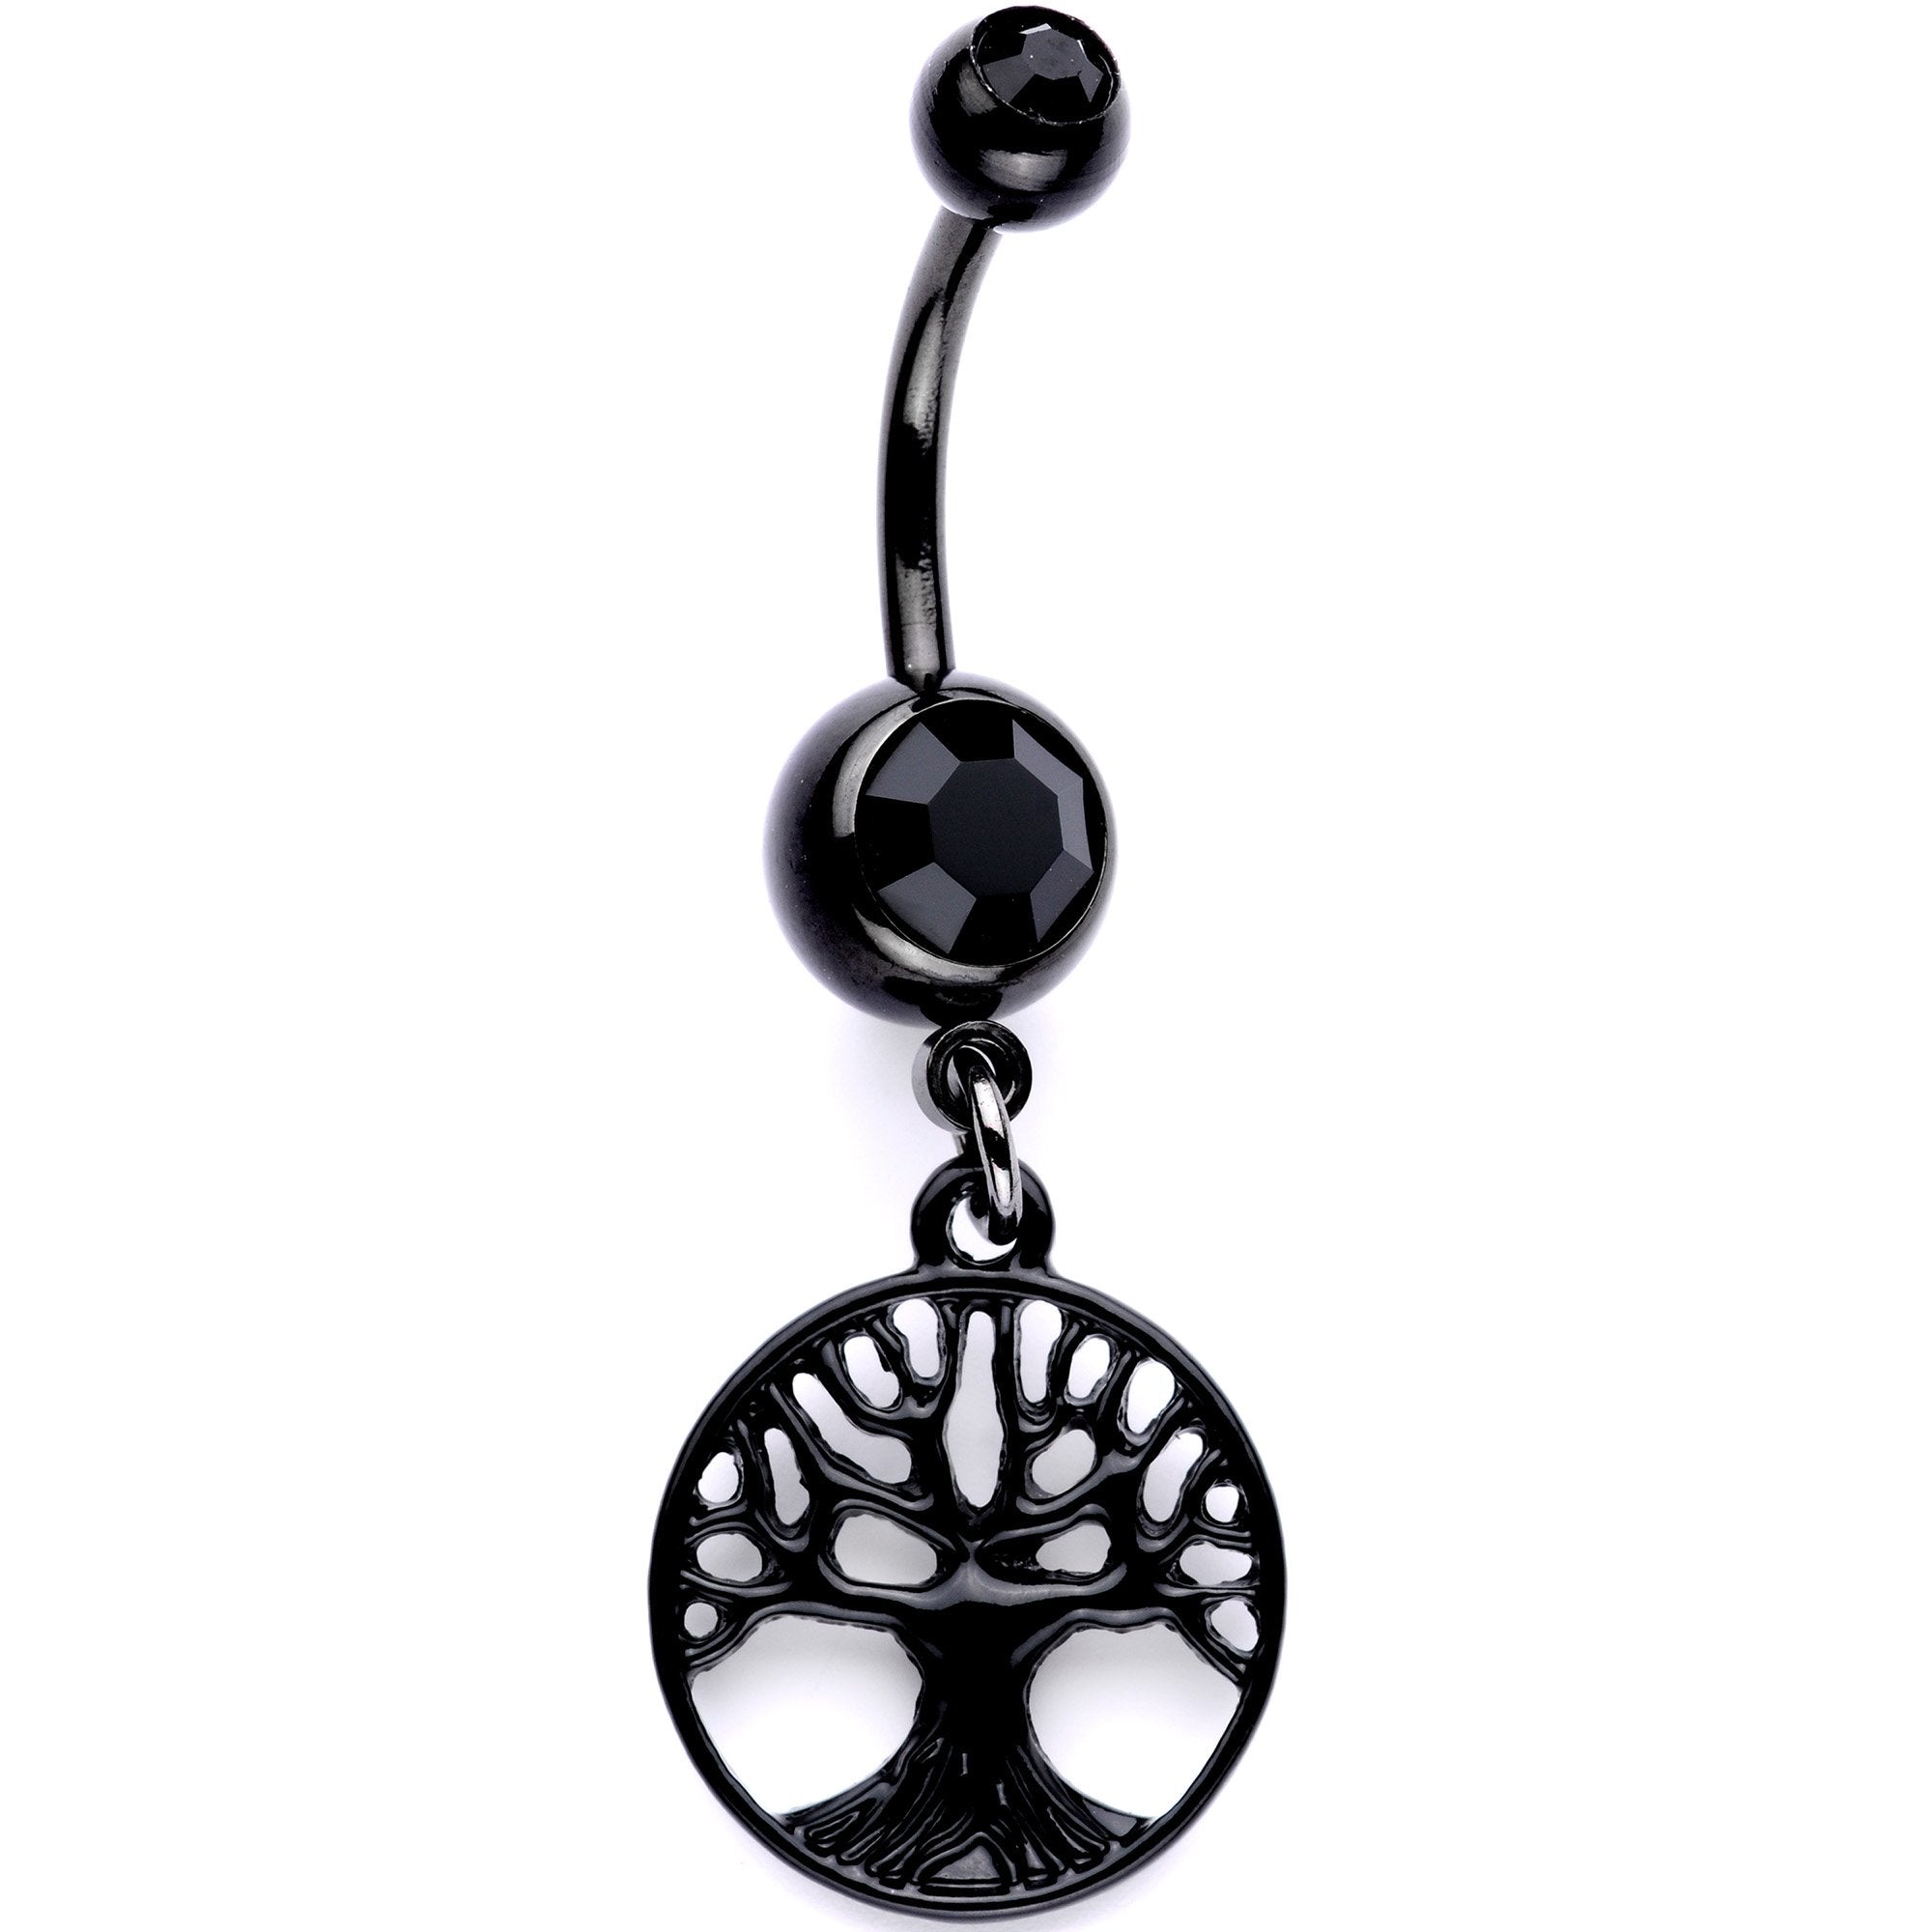 Black Gem Black Anodized Tree of Life Charm Dangle Belly Ring